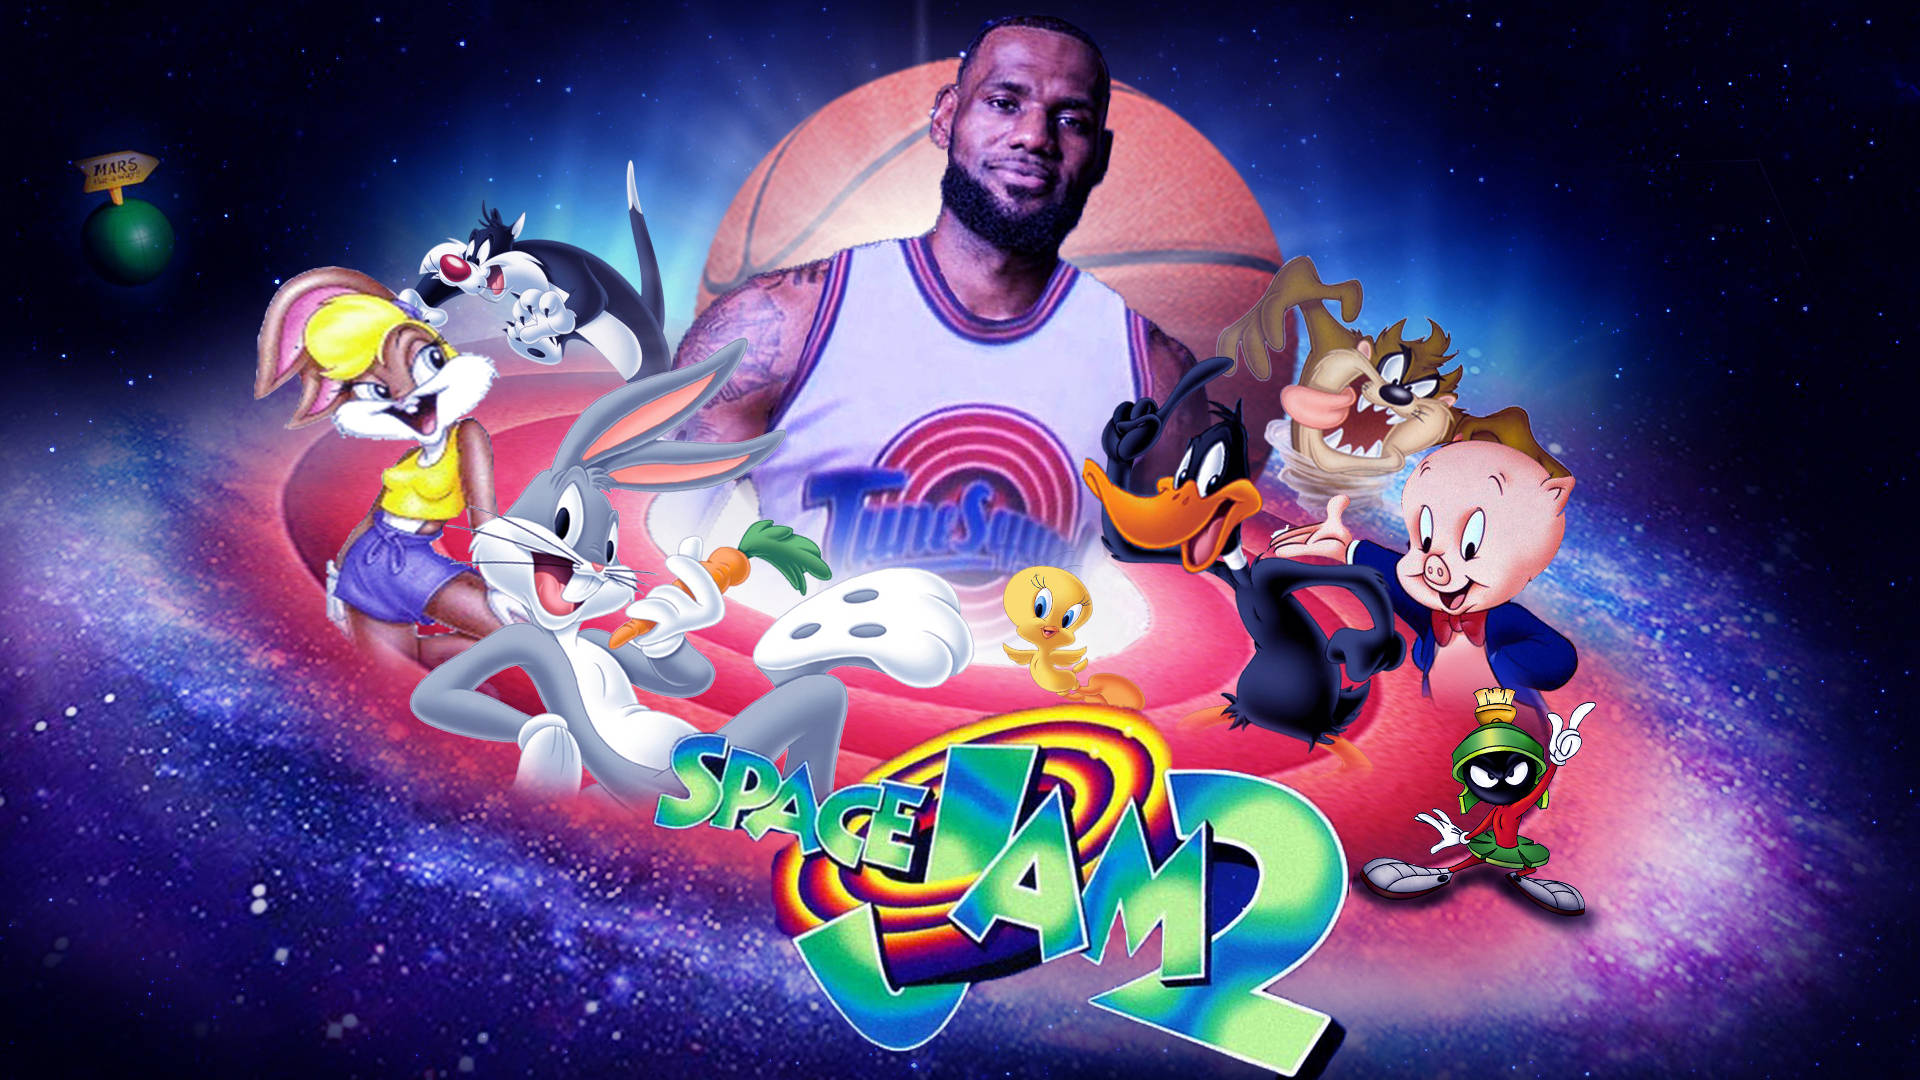 Get Ready for an Epic Match - Space Jam 2 Wallpaper